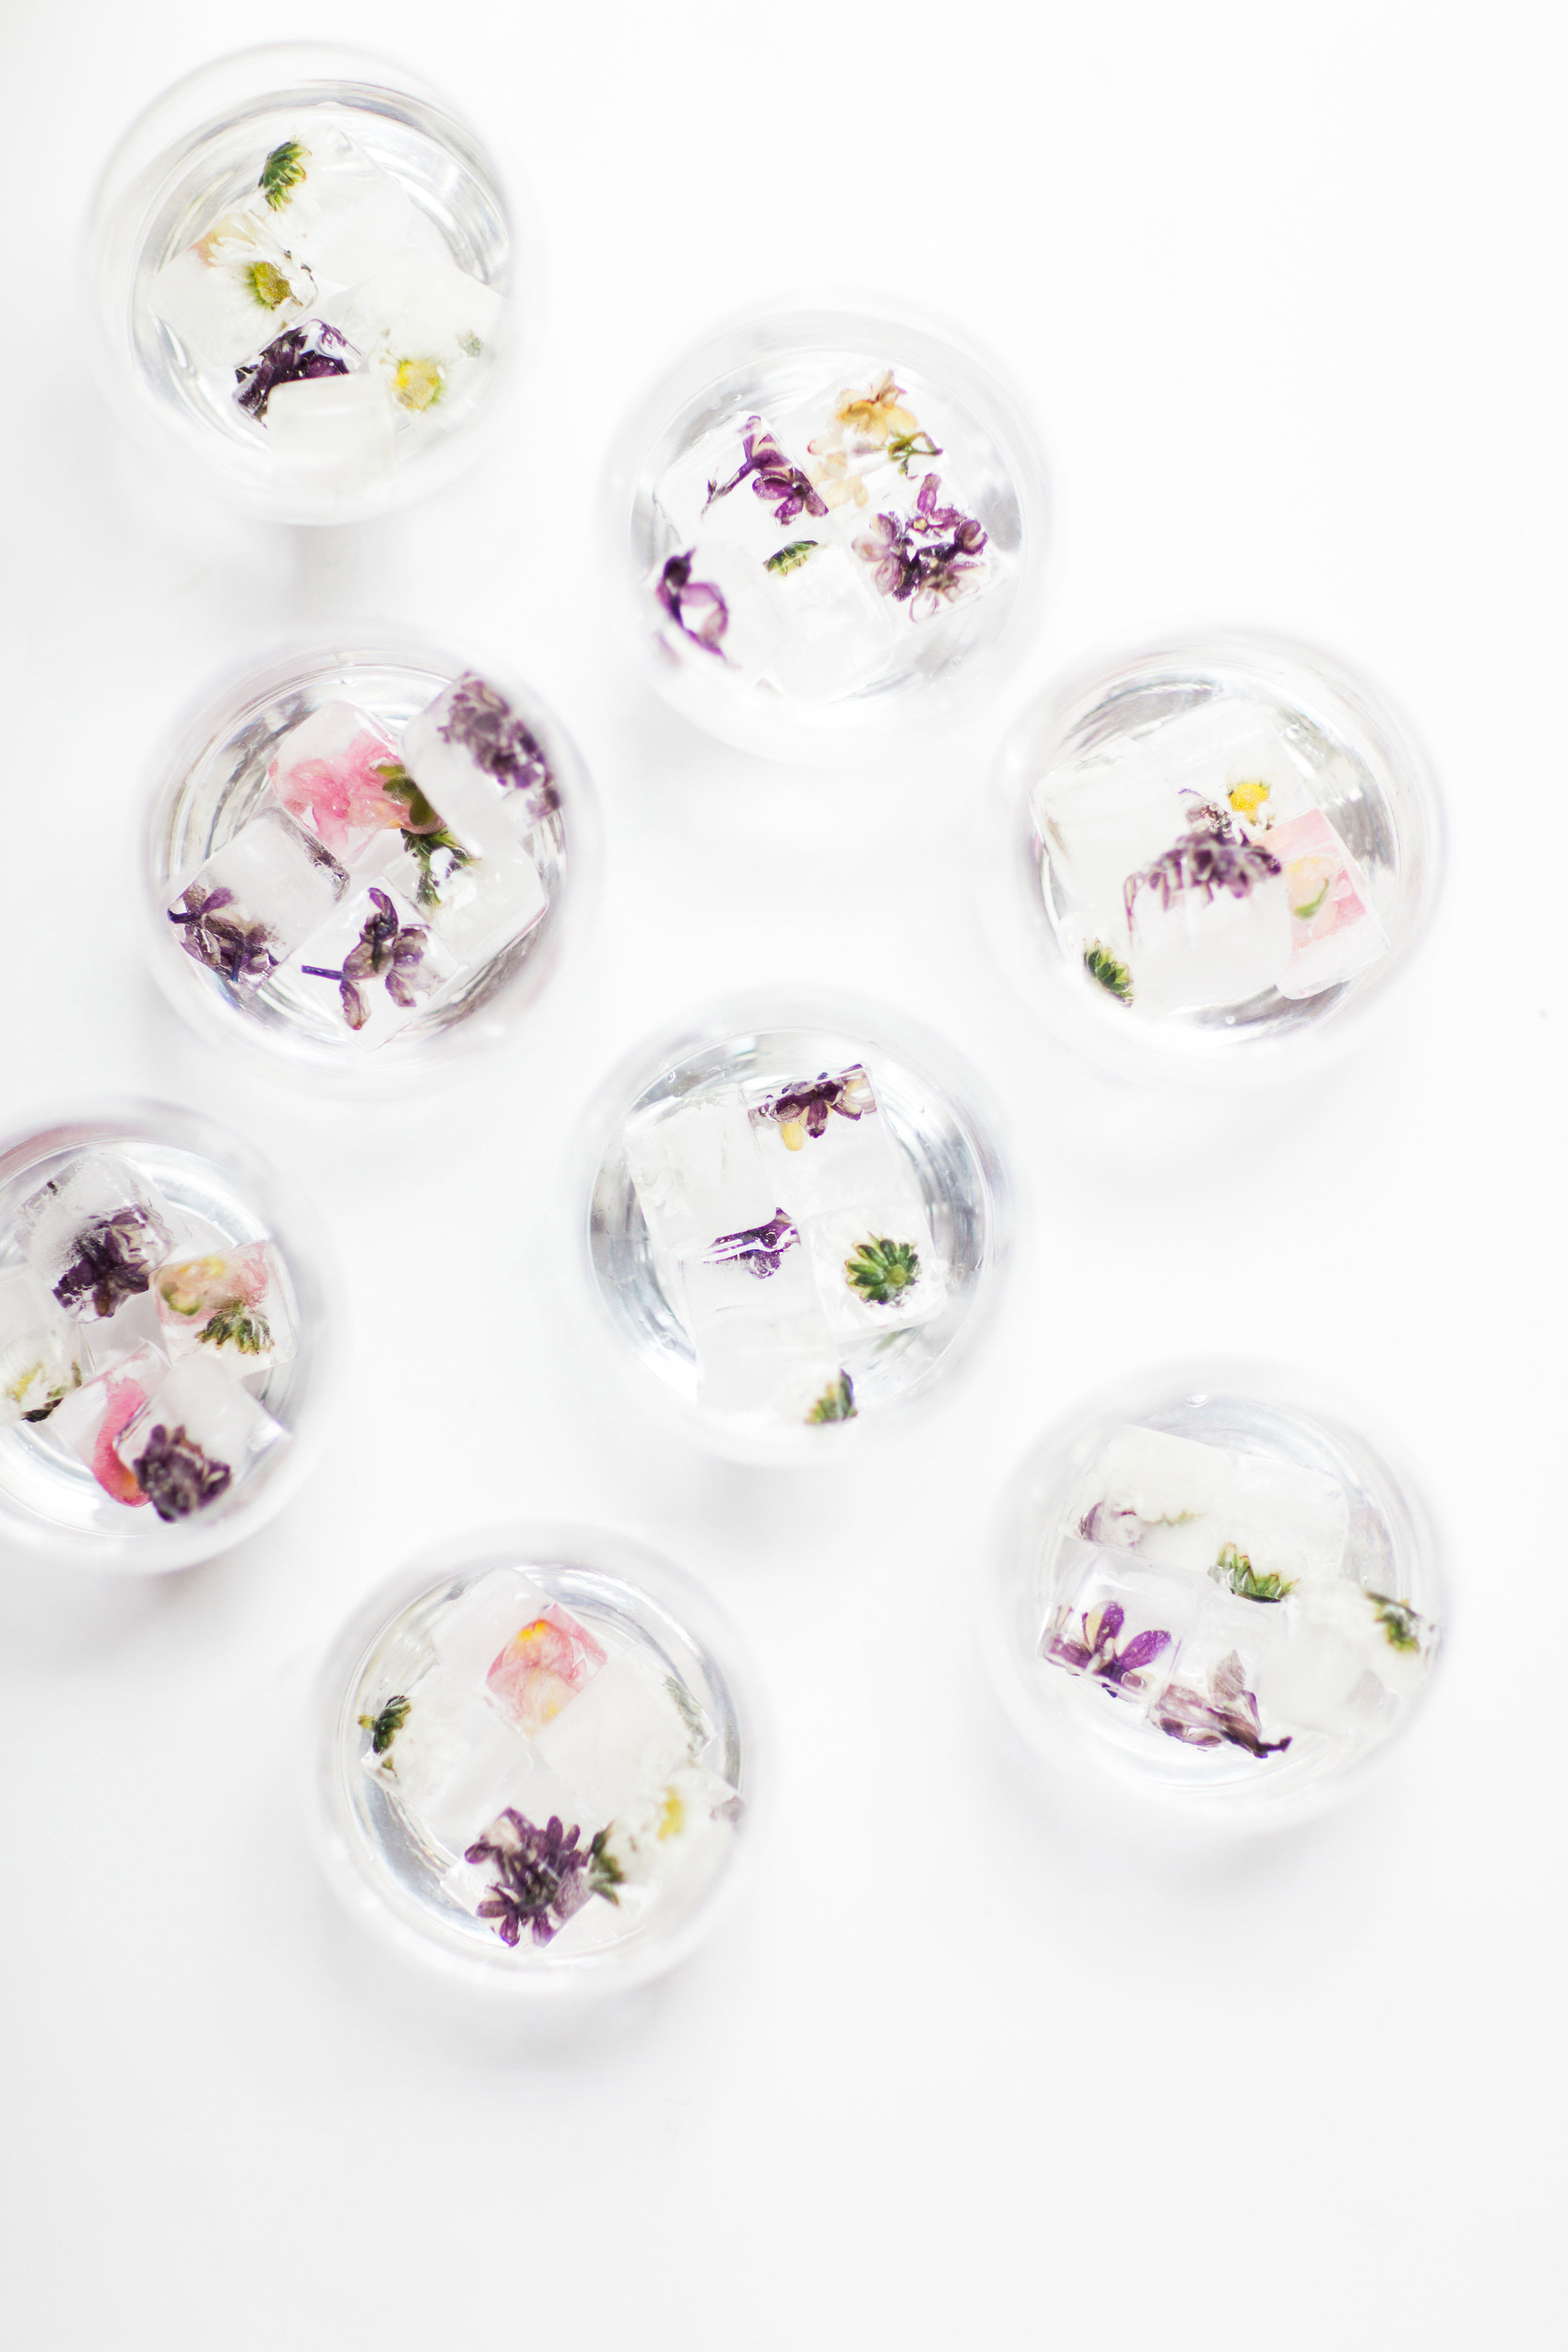 How to make the prettiest simple DIY floral ice cubes using fresh flowers for your next party. | glitterinc.com | @glitterinc